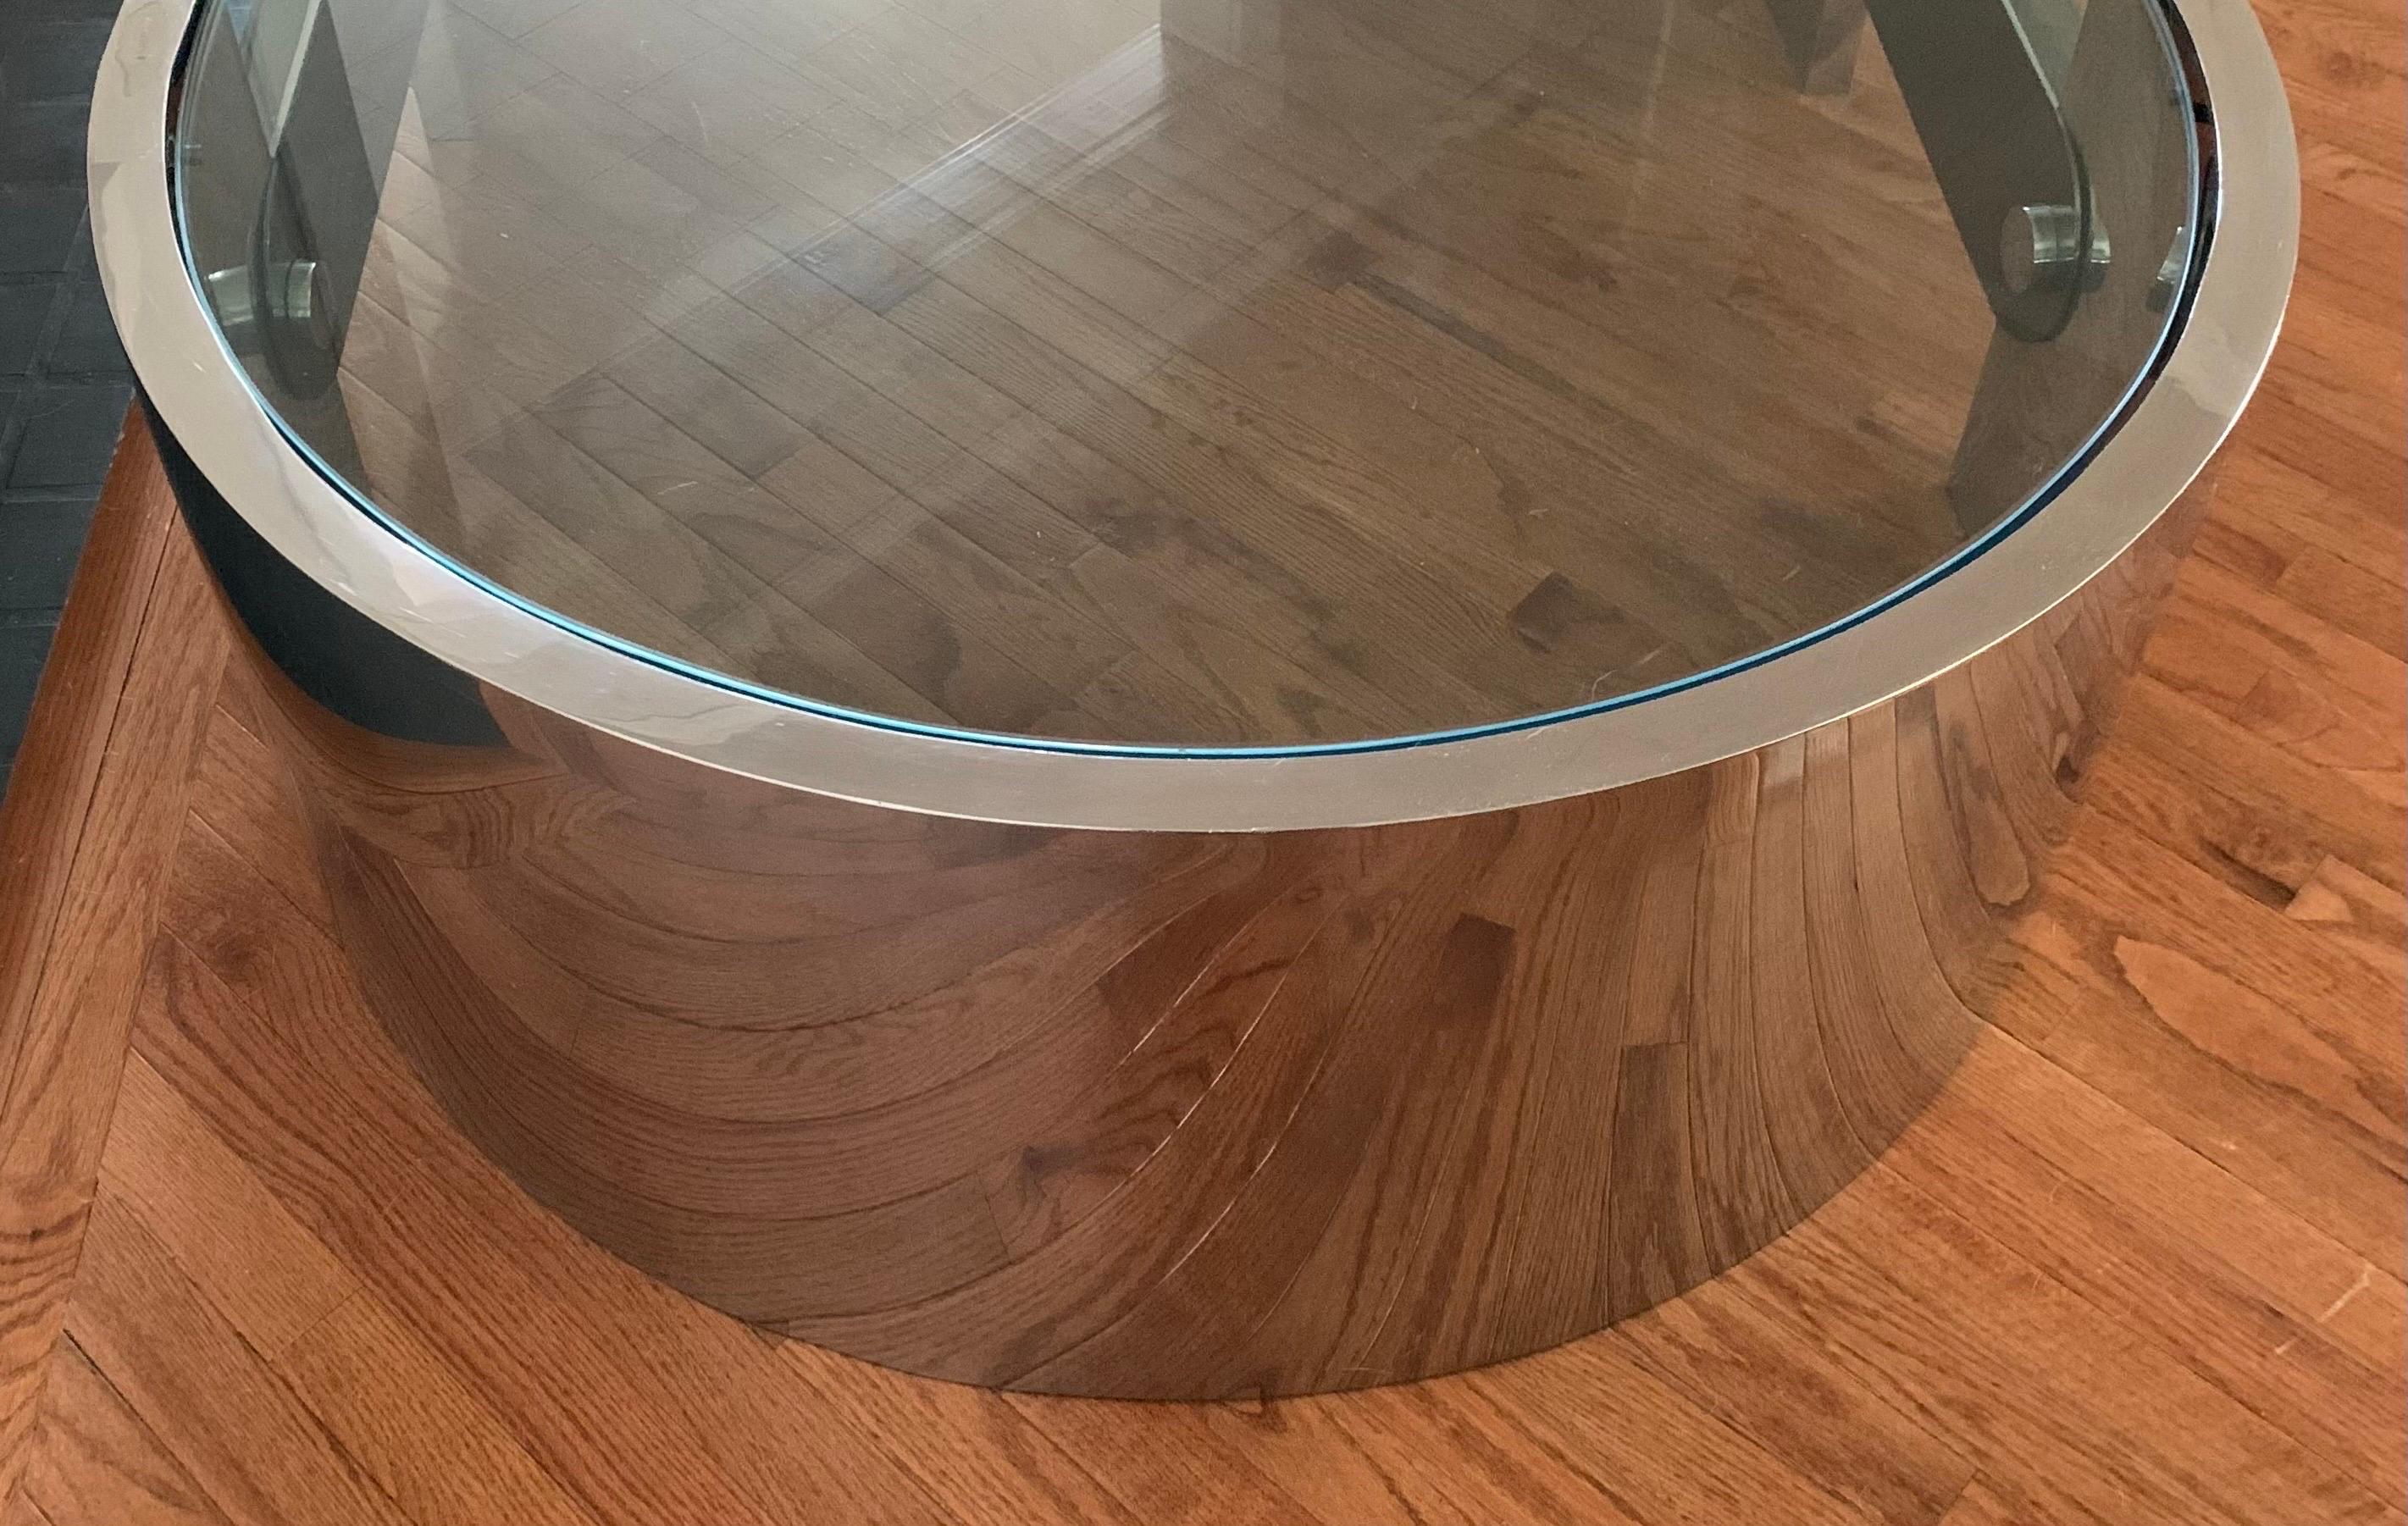 1970s Modern Polished Steel & Glass Coffee Table by Ron Seff for Karl Springer 1